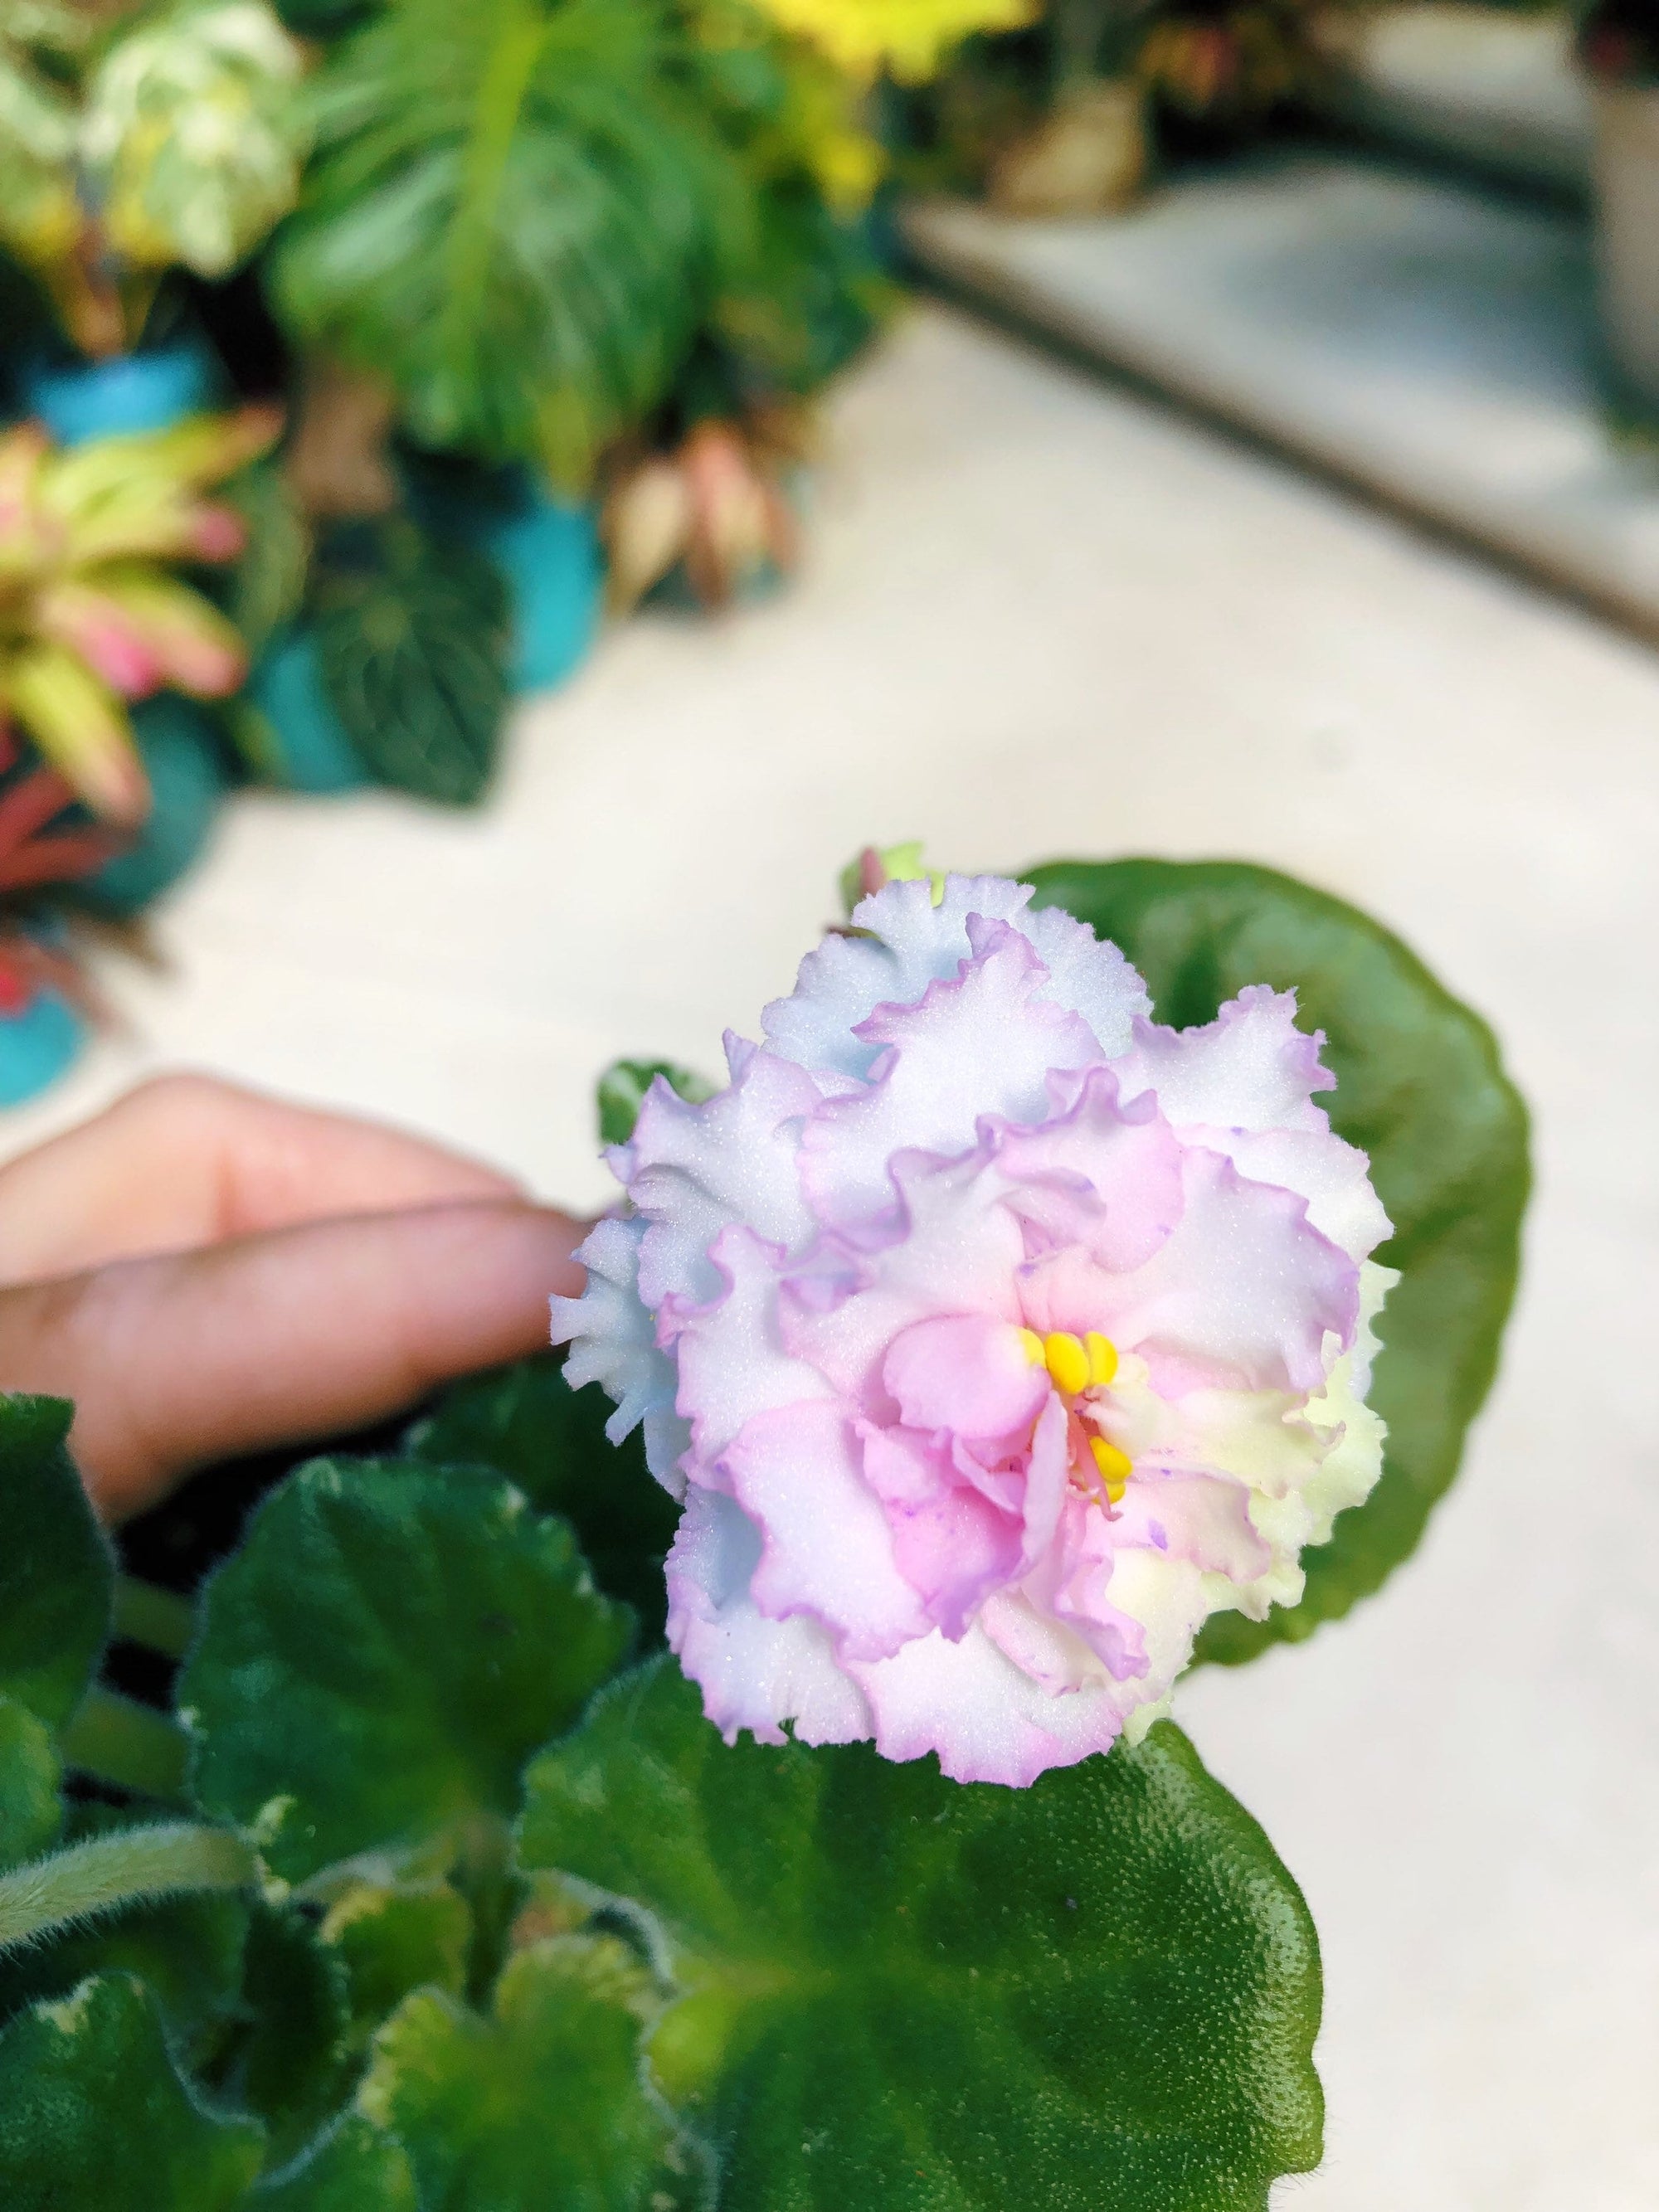 Live house plant pink white bloom variegated African Violet ‘Harmony’s Ice Maiden’ garden 4” pot flower Potted gift